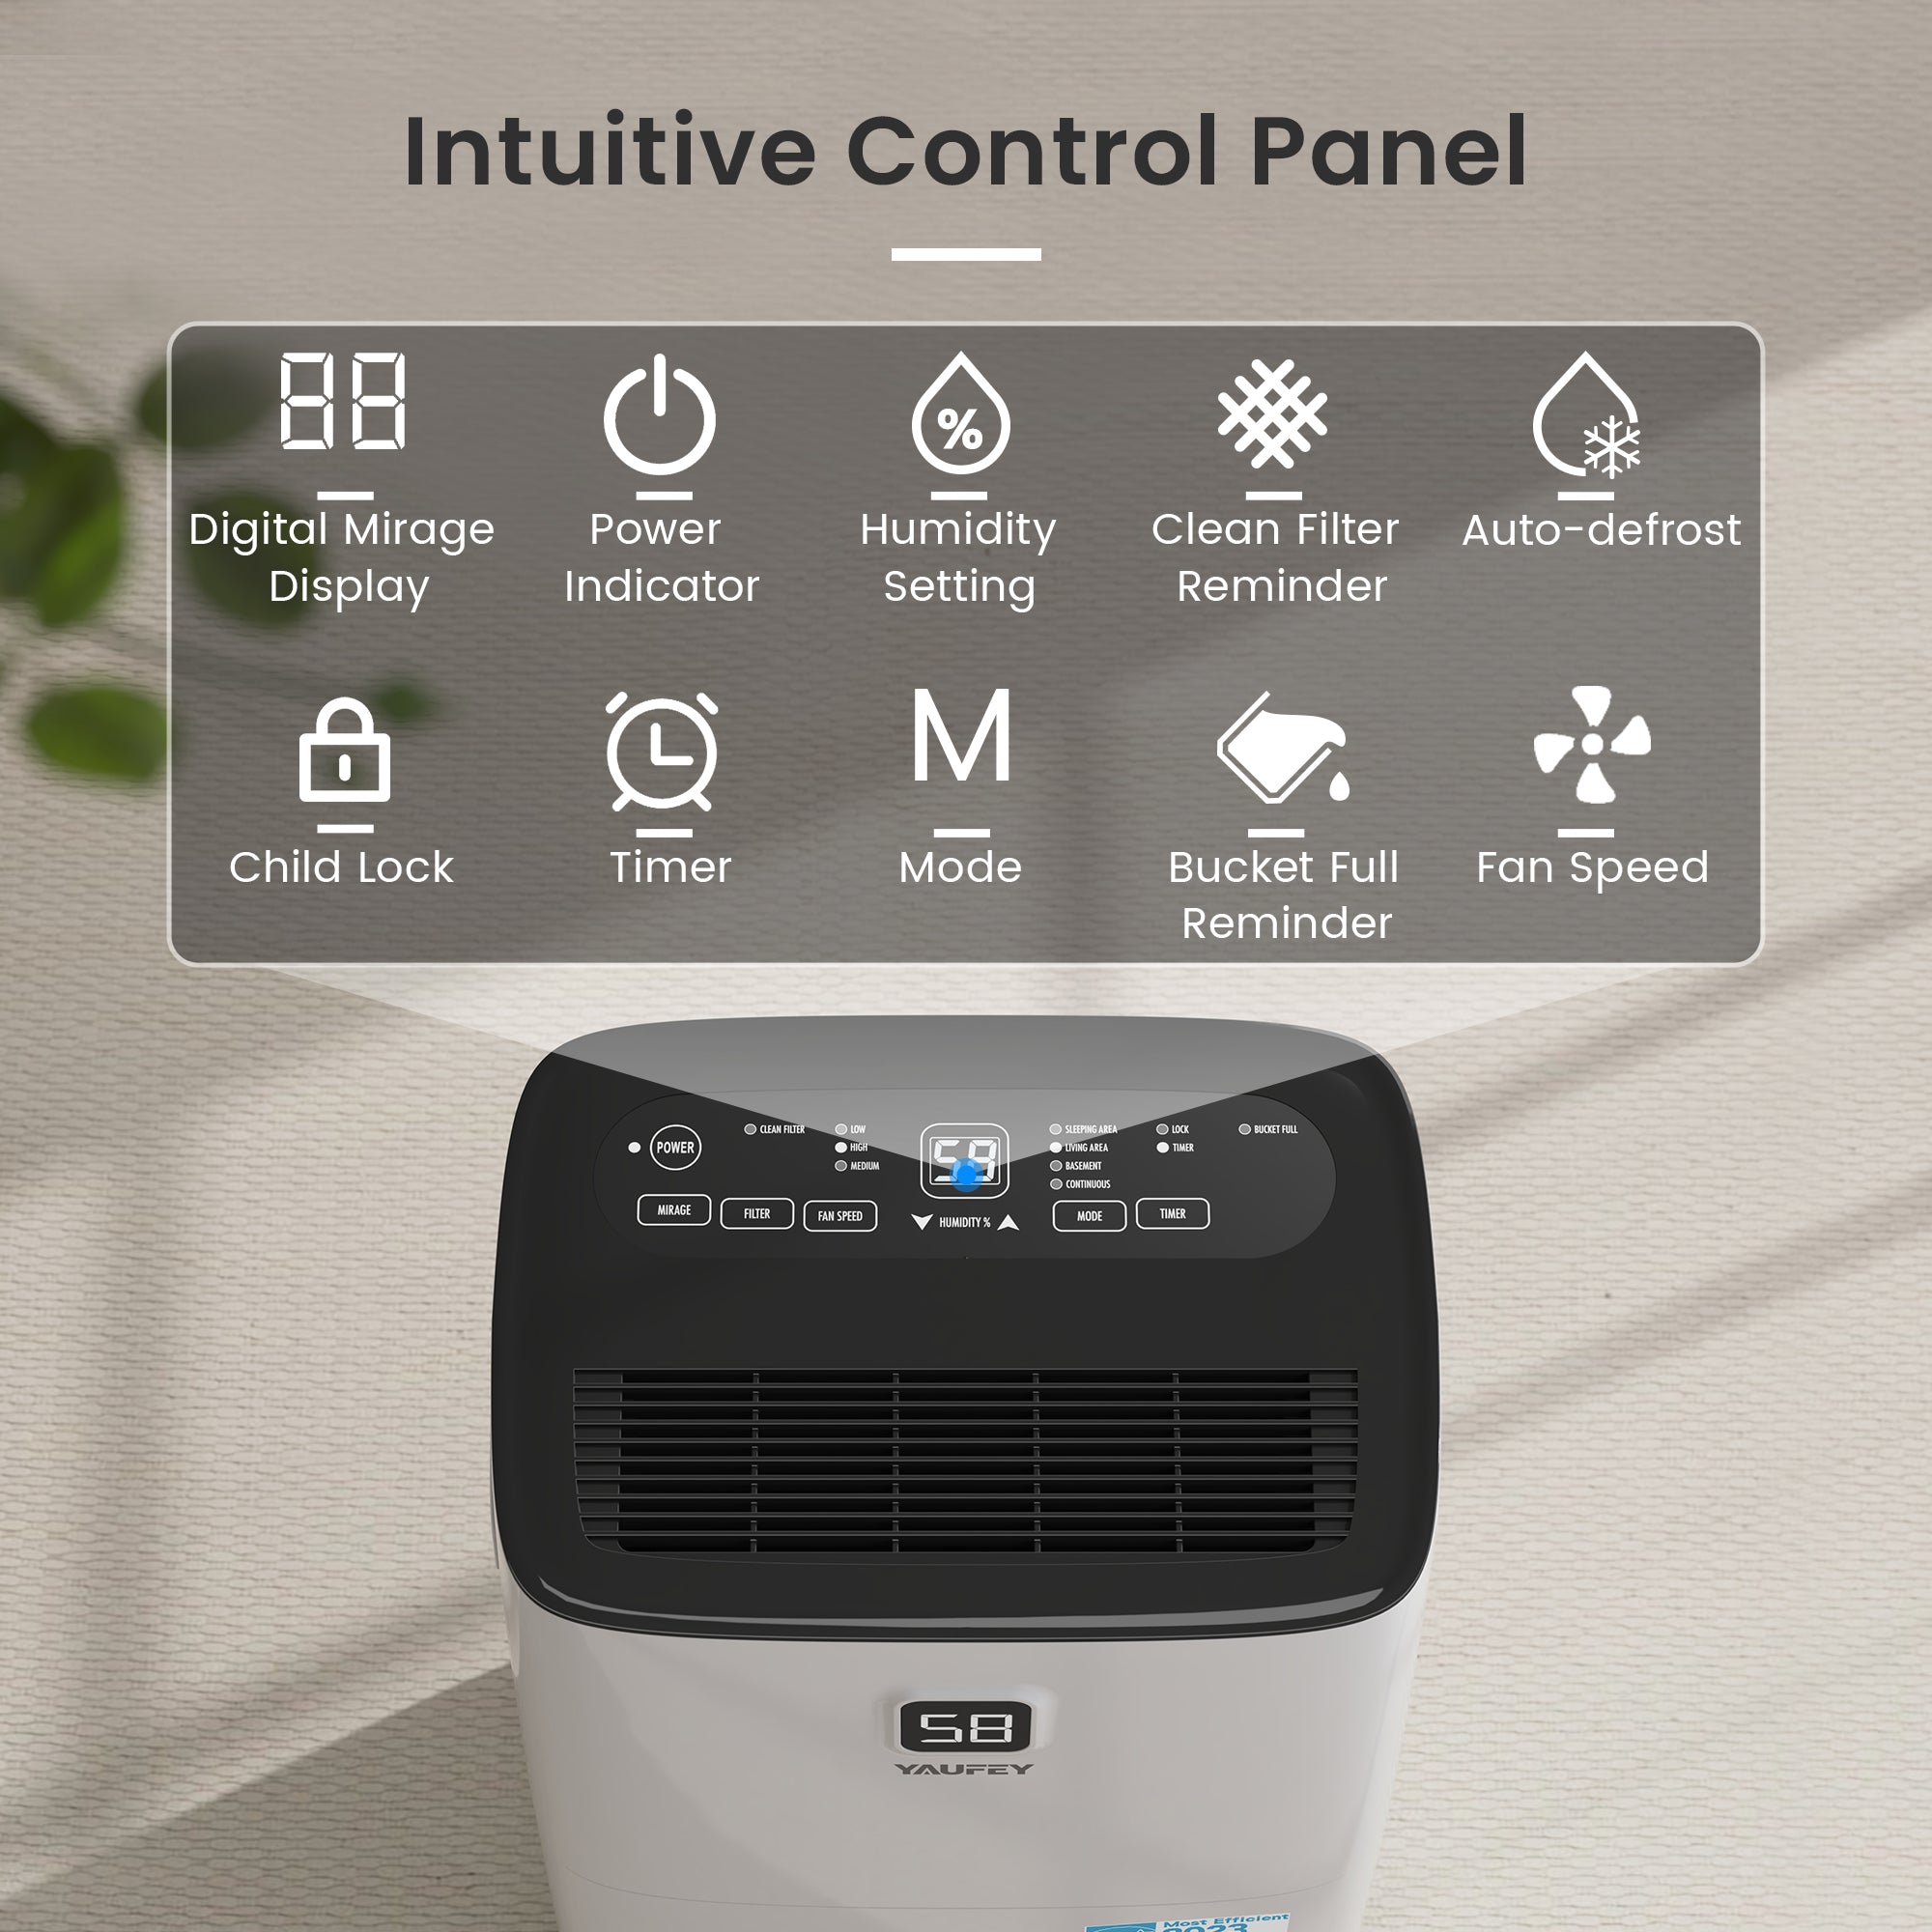 Yaufey 120-Pint Energy Star Dehumidifier for Home, Basement and Large Rooms up to 6000 Sq. Ft, Powerful and Quiet, with Timer, Intelligent Humidity Control, Drain Hose and Large Water Tank(Model: JD025Q-120)